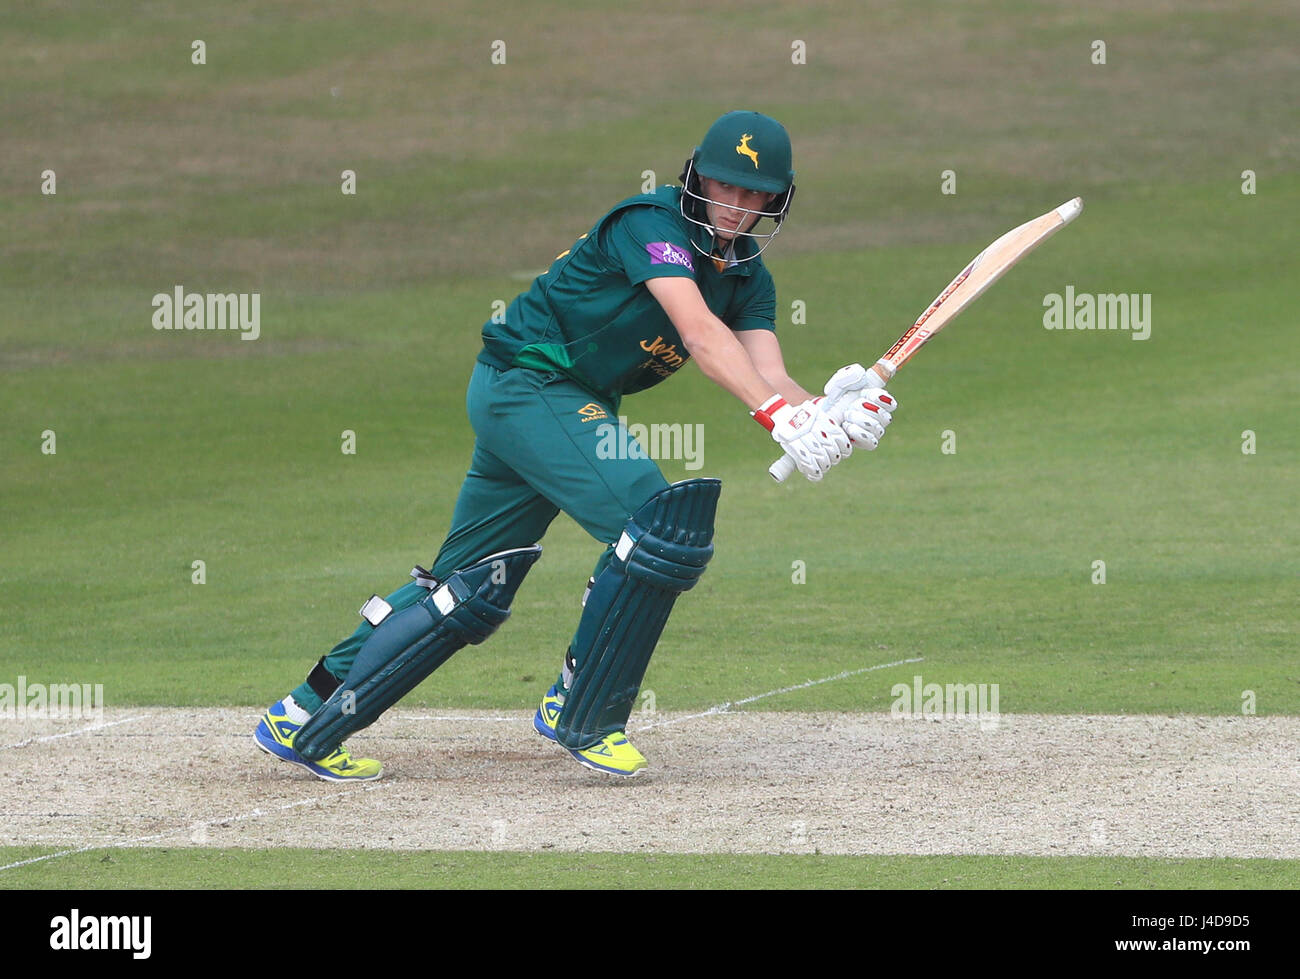 Nottinghamshire's Billy Root during the Royal London One Day Cup match at Trent Bridge, Nottingham. PRESS ASSOCIATION Photo. Picture date: Thursday May 11 2017. See PA story CRICKET Nottinghamshire. Photo credit should read: Tim Goode/PA Wire. Stock Photo